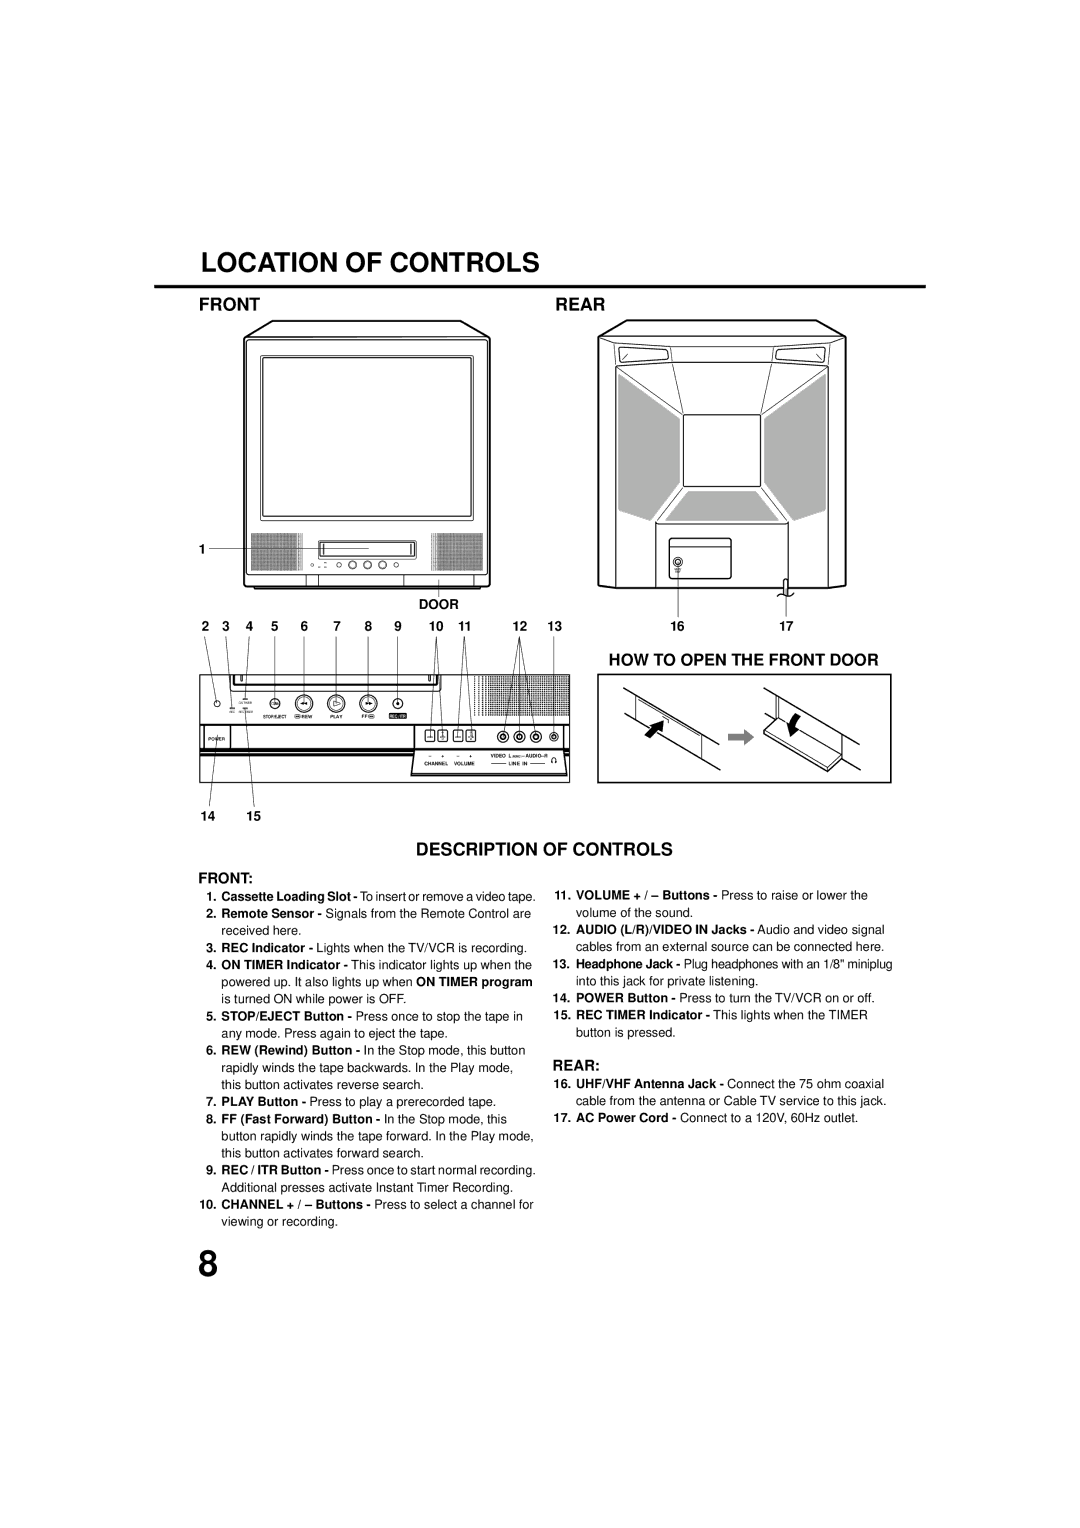 JVC TV-20F243 manual Location of Controls, Front Rear, Description of Controls, HOW to Open the Front Door 